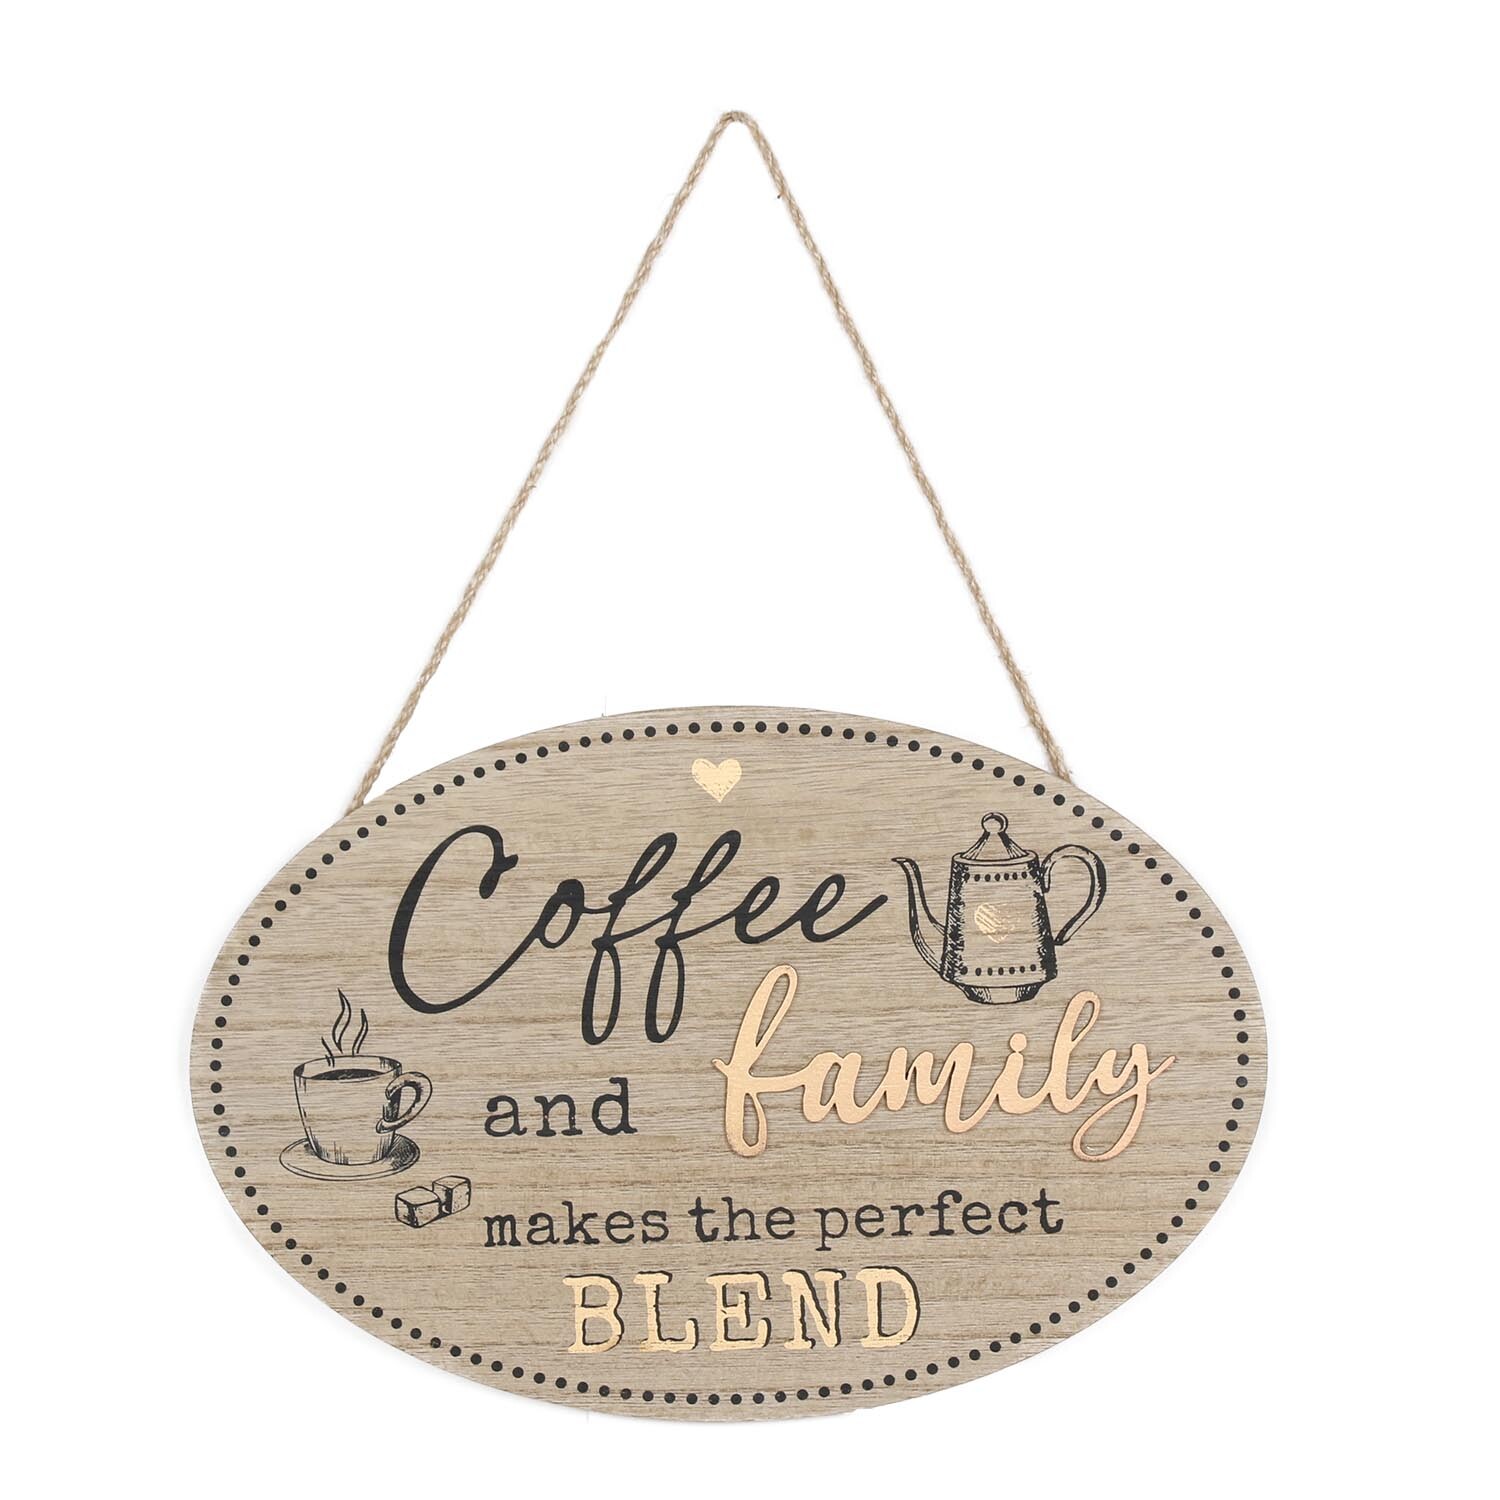 Rustic Wooden Coffee Slogan Sign Image 2